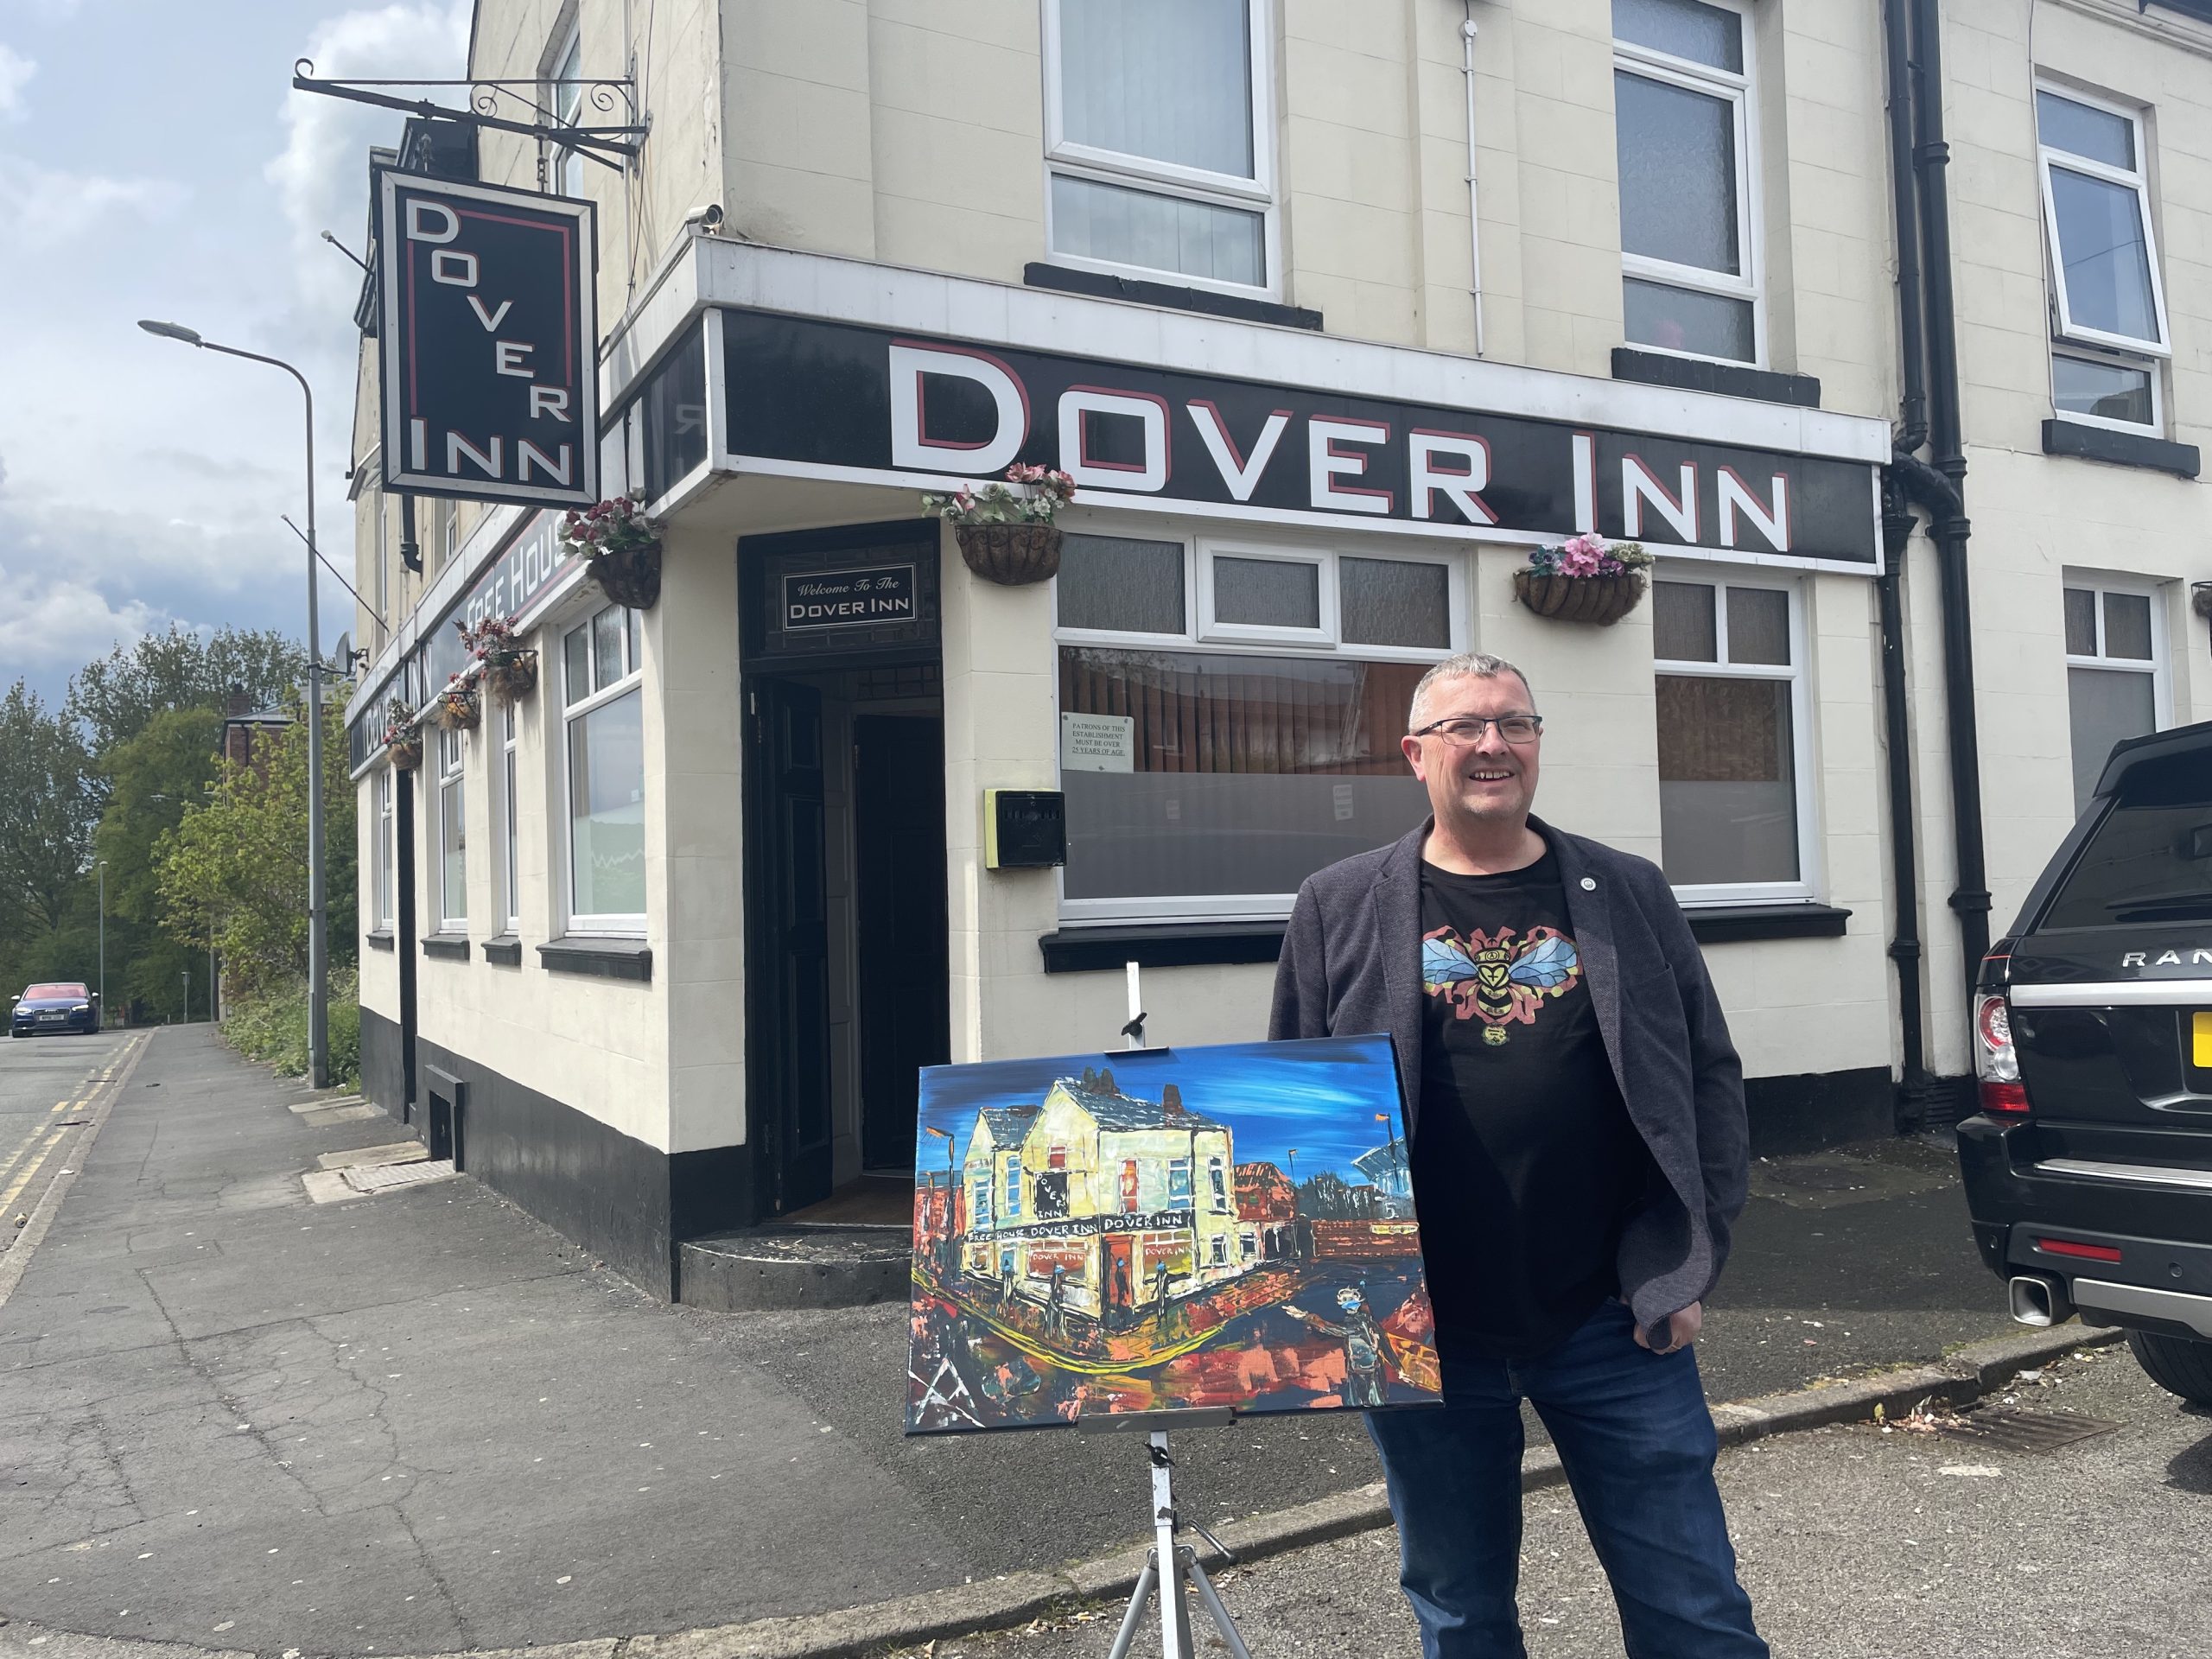 Meet the artist aiming to preserve Salford pubs with his artwork